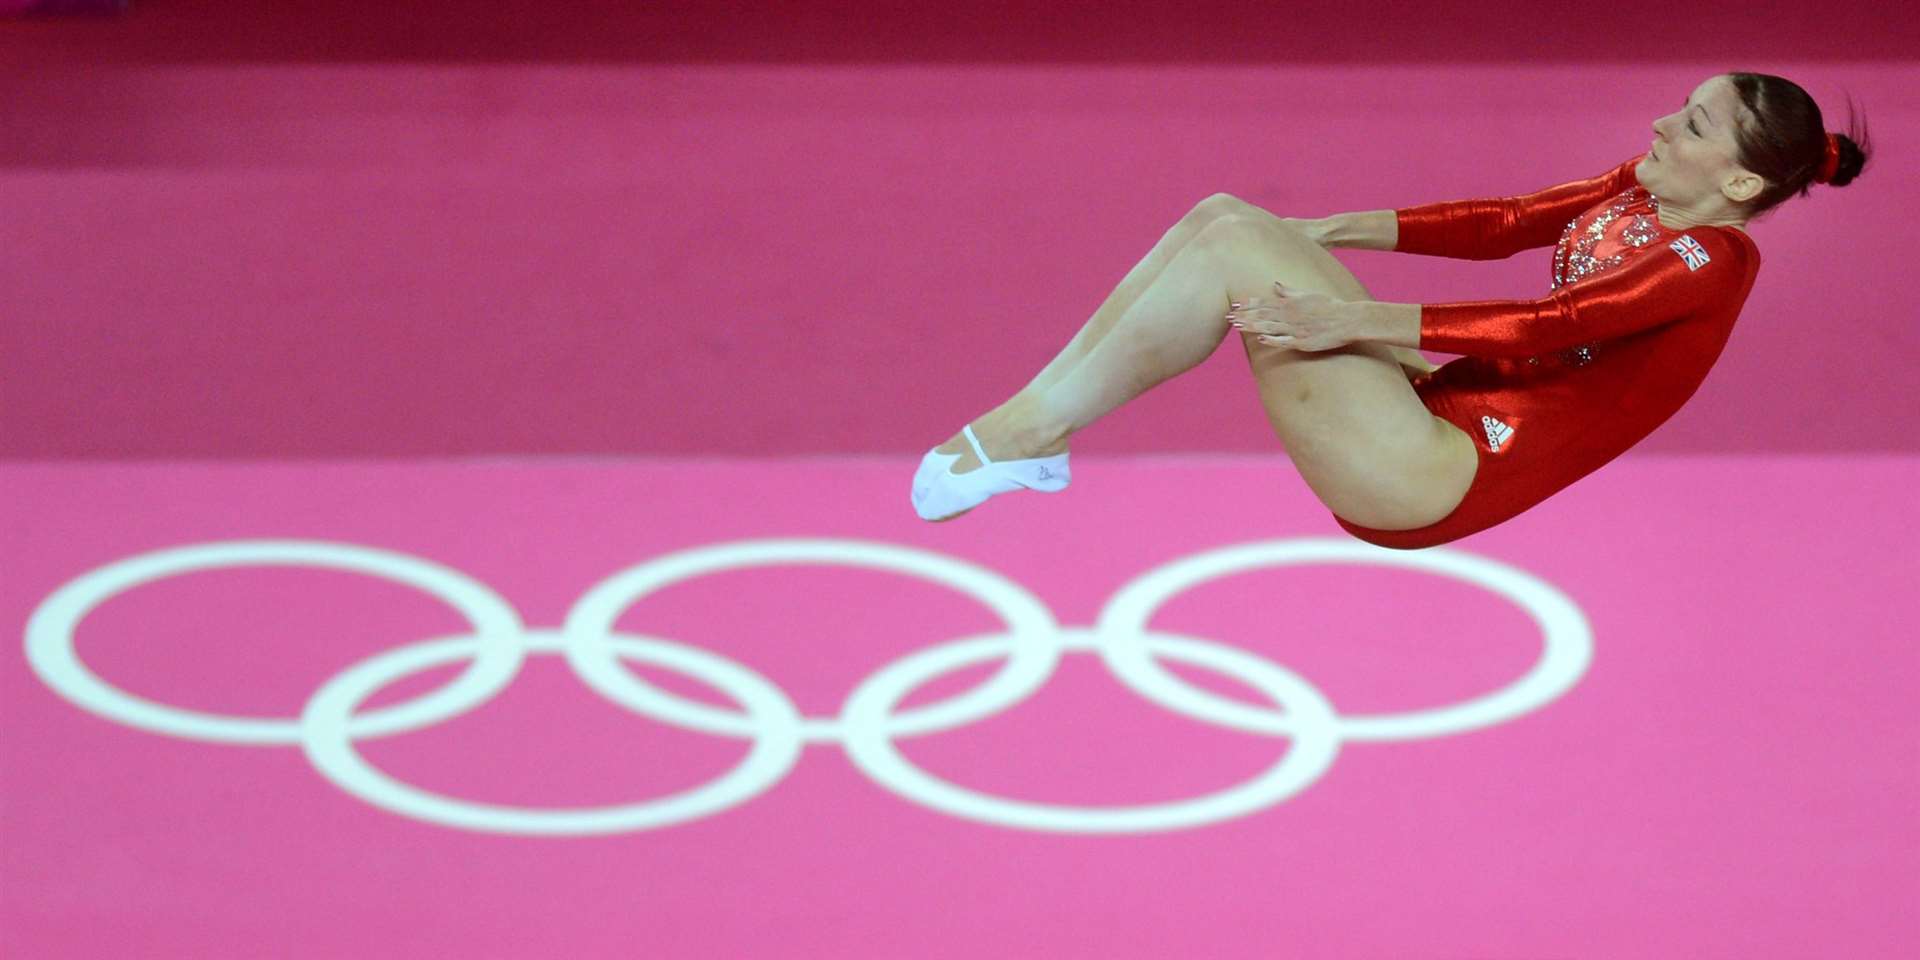 Medway's Kat Driscoll competes during the trampoline qualification. Picture: Anthony Devlin/PA